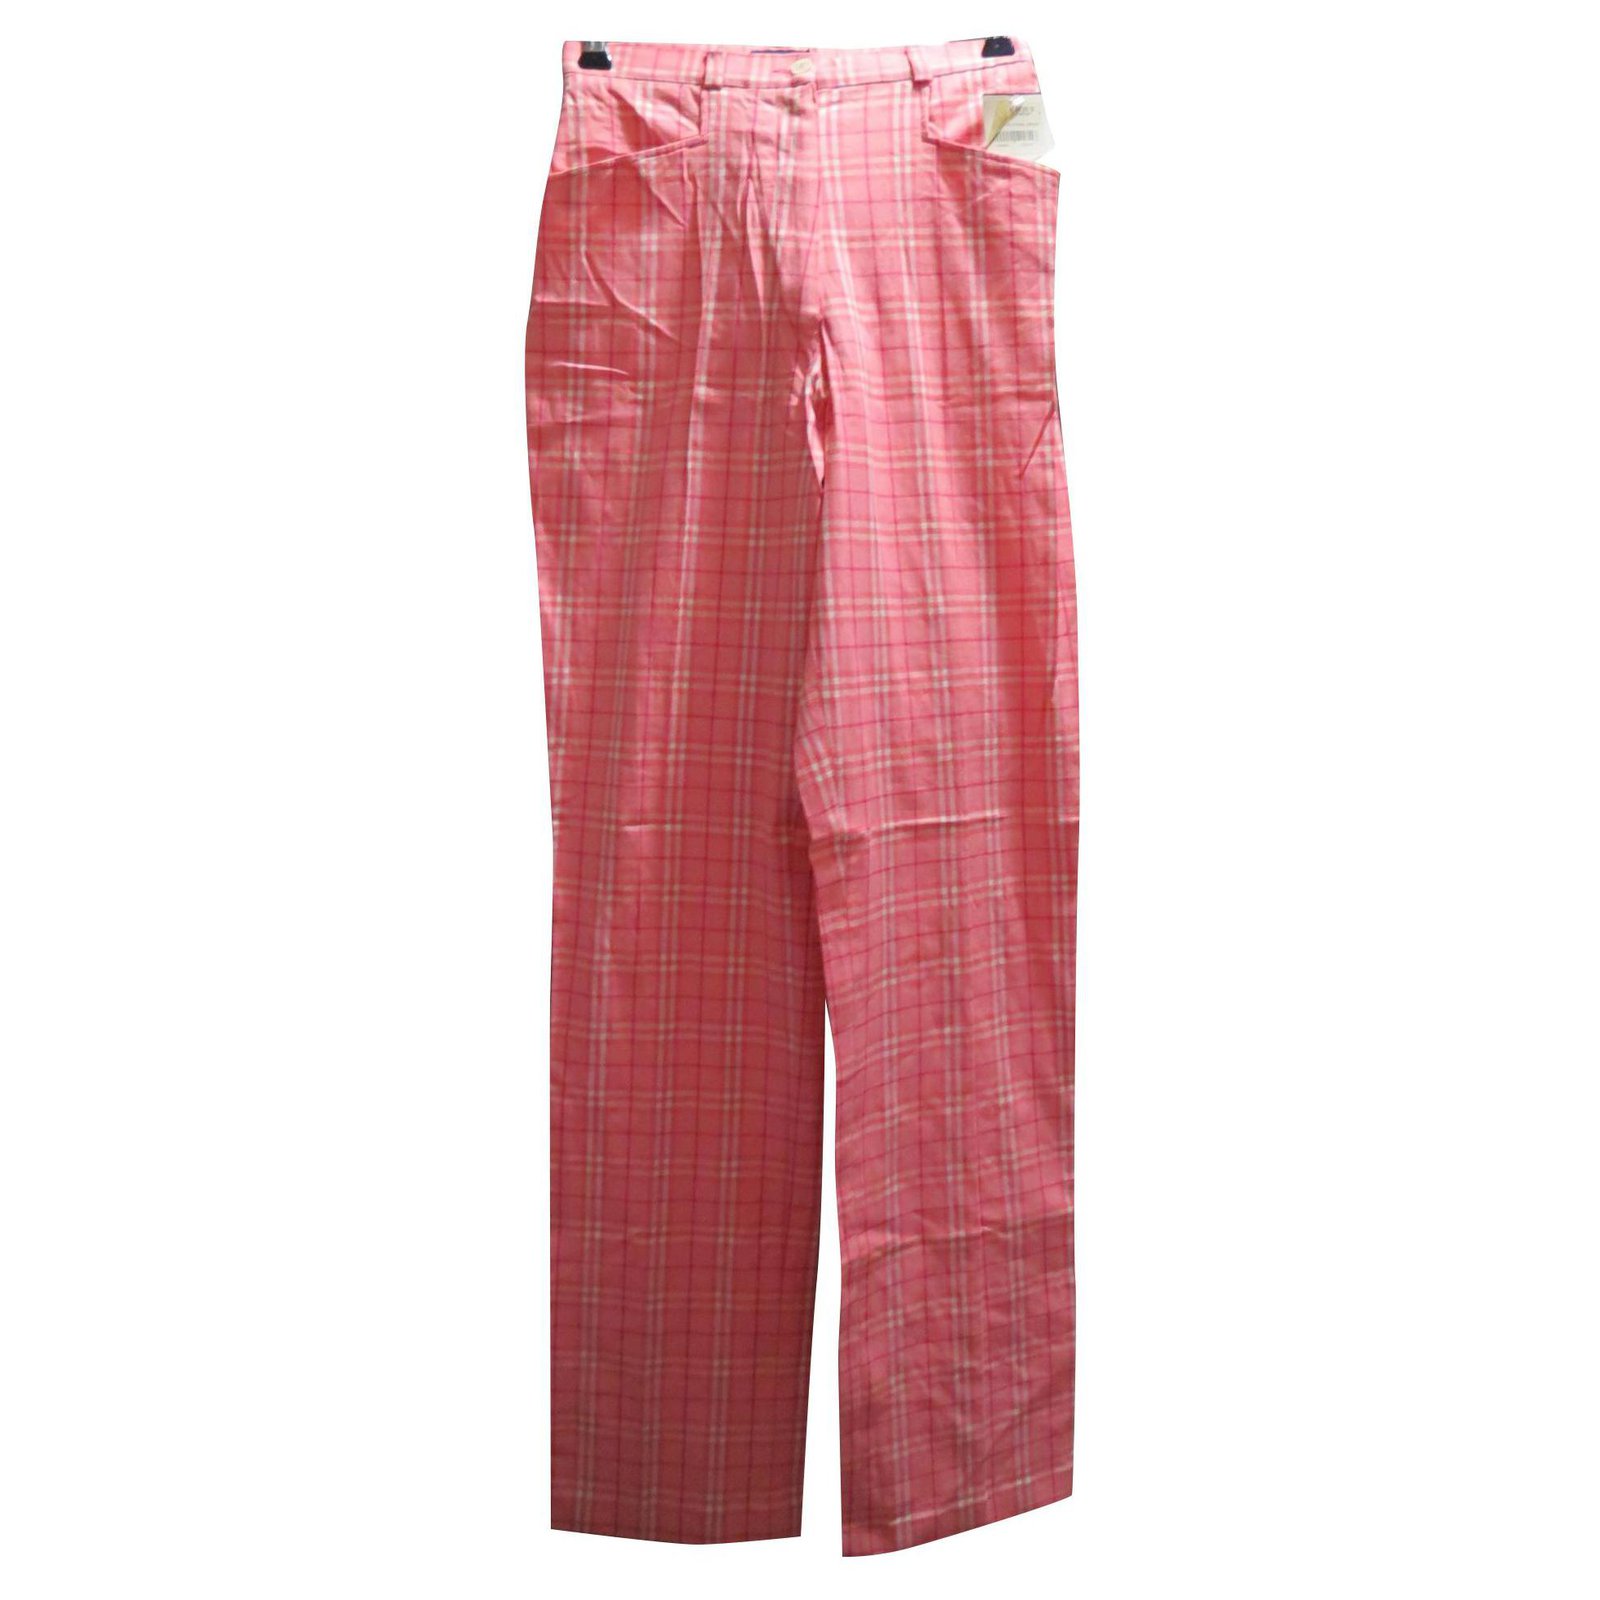 burberry pants womens red